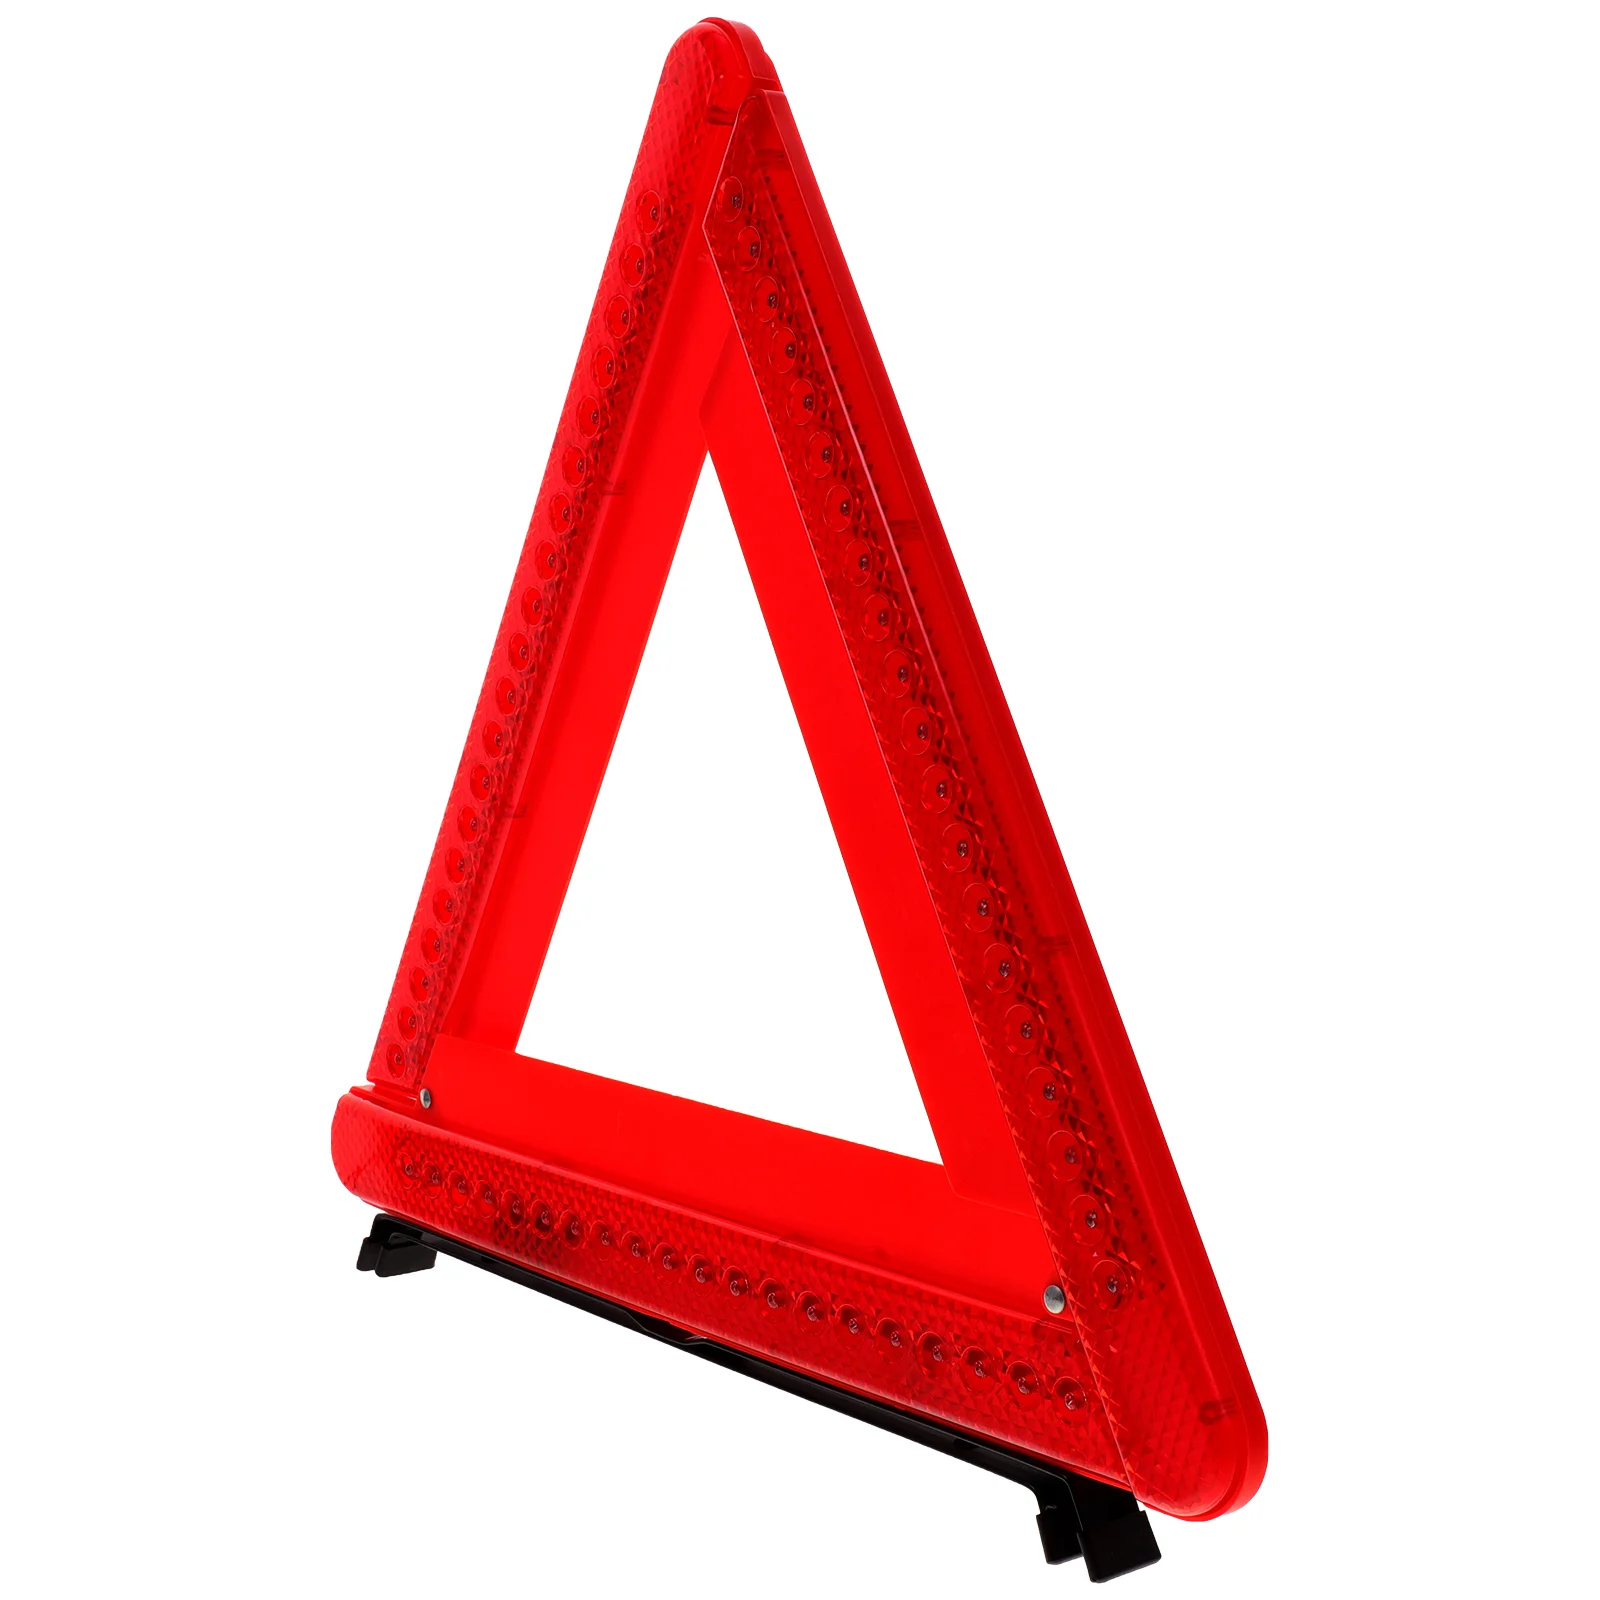 

Triangle Warning Light Caution Lights Trucks Foldable Stand Reflector Roadside Lighting Device Safety Abs Emergency Sign Stands